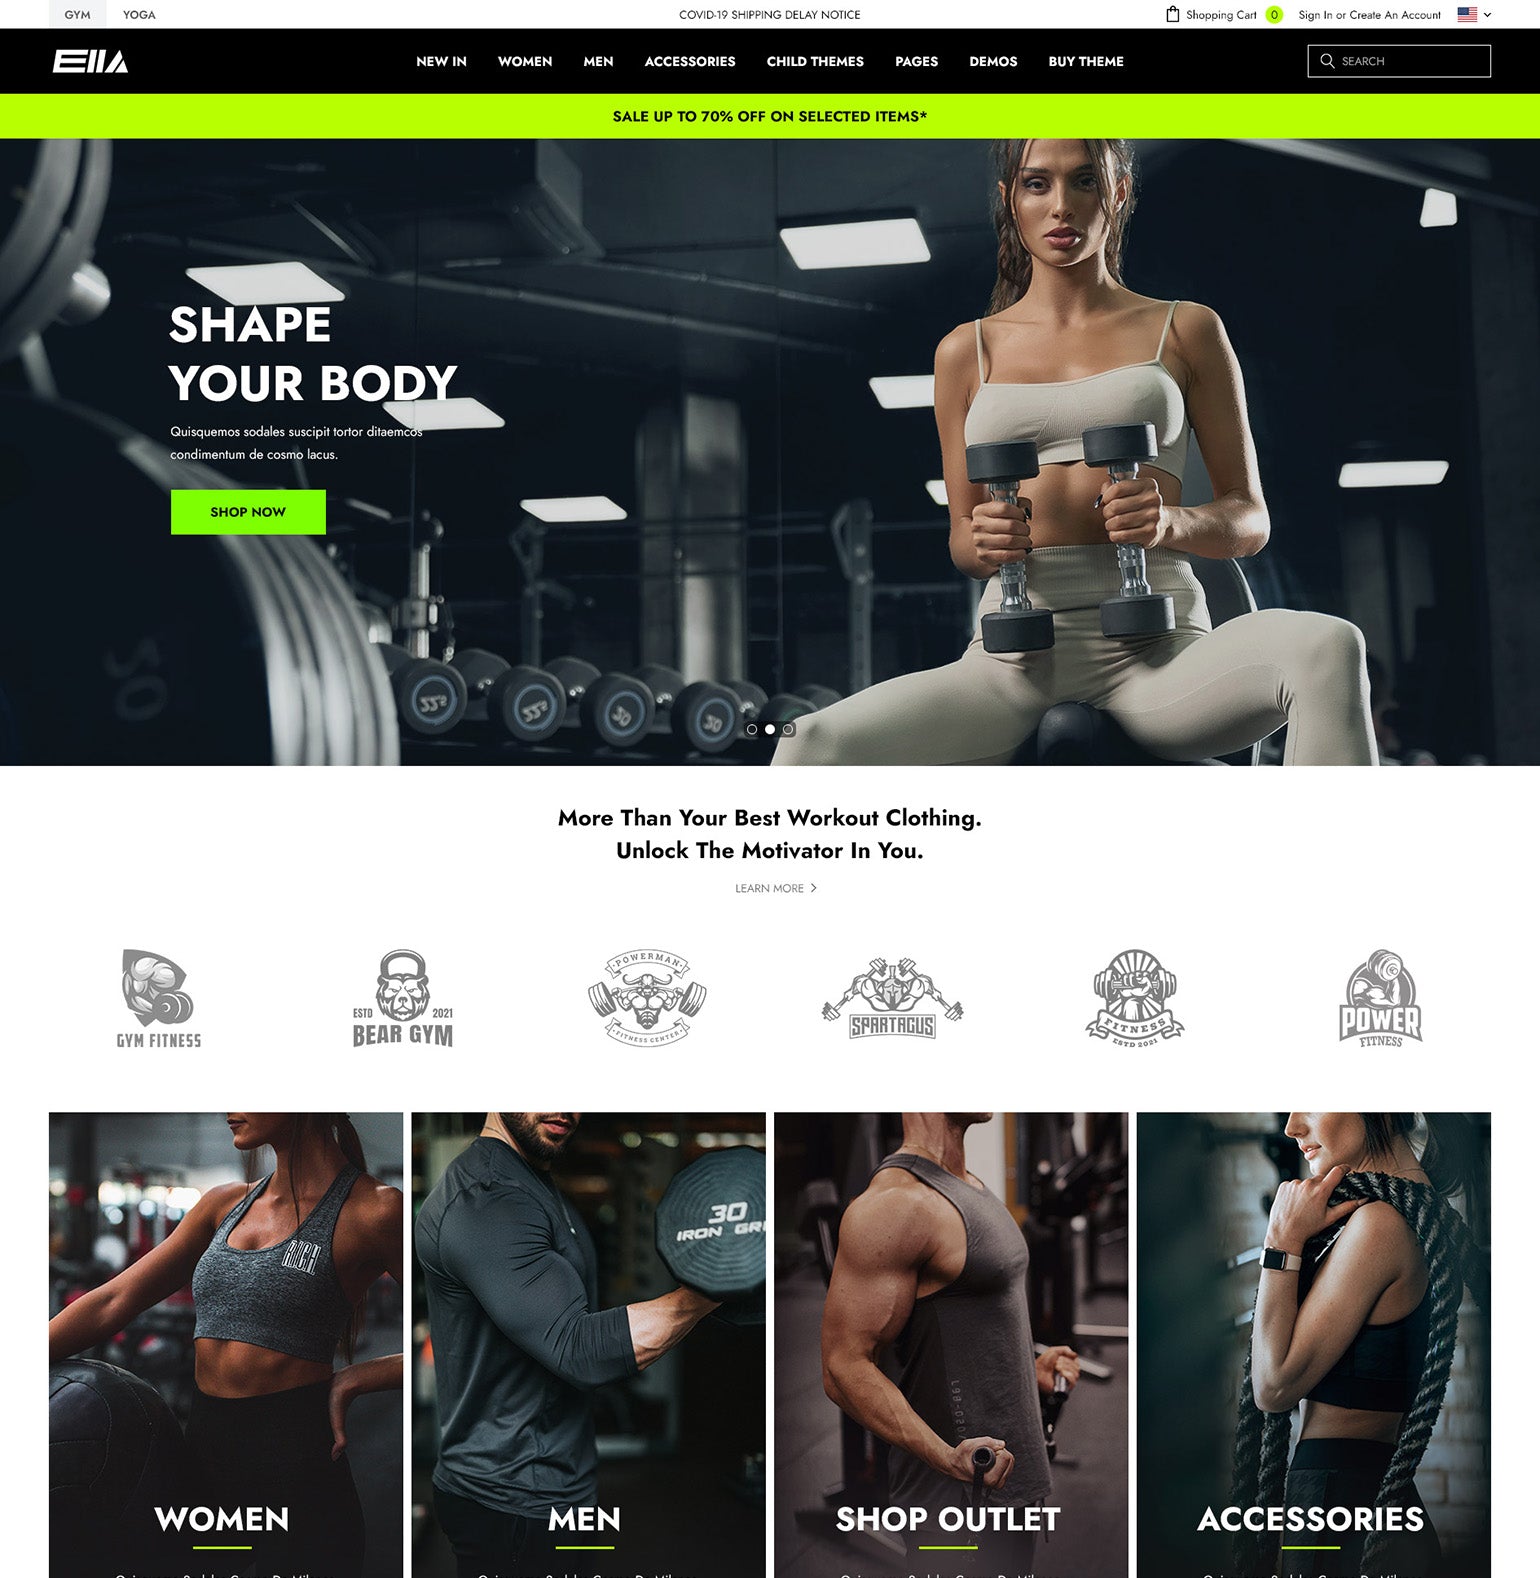 Ella Theme - Gym and Sportwear Ecommerce Website Template - 3